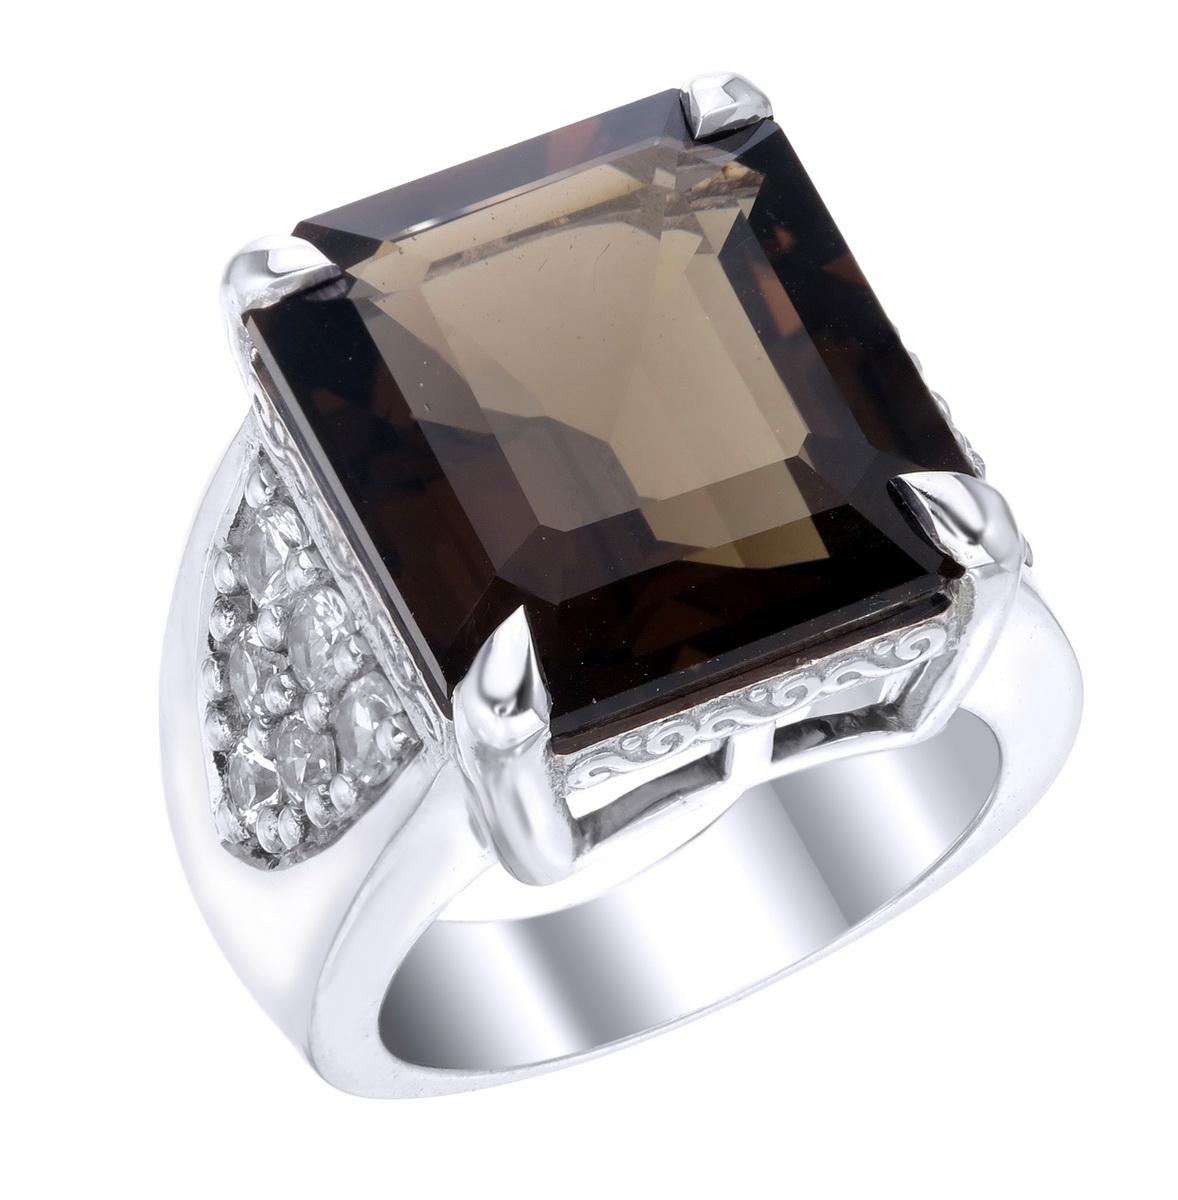 Orloff of Denmark; 13.91 carat Smoky Quartz Sterling Silver Ring set with twelve Fancy White Sapphires.

This piece has been fashioned out of 925 sterling silver, and features a near-14 carat smoky quartz gem held by a claw setting of four sharp